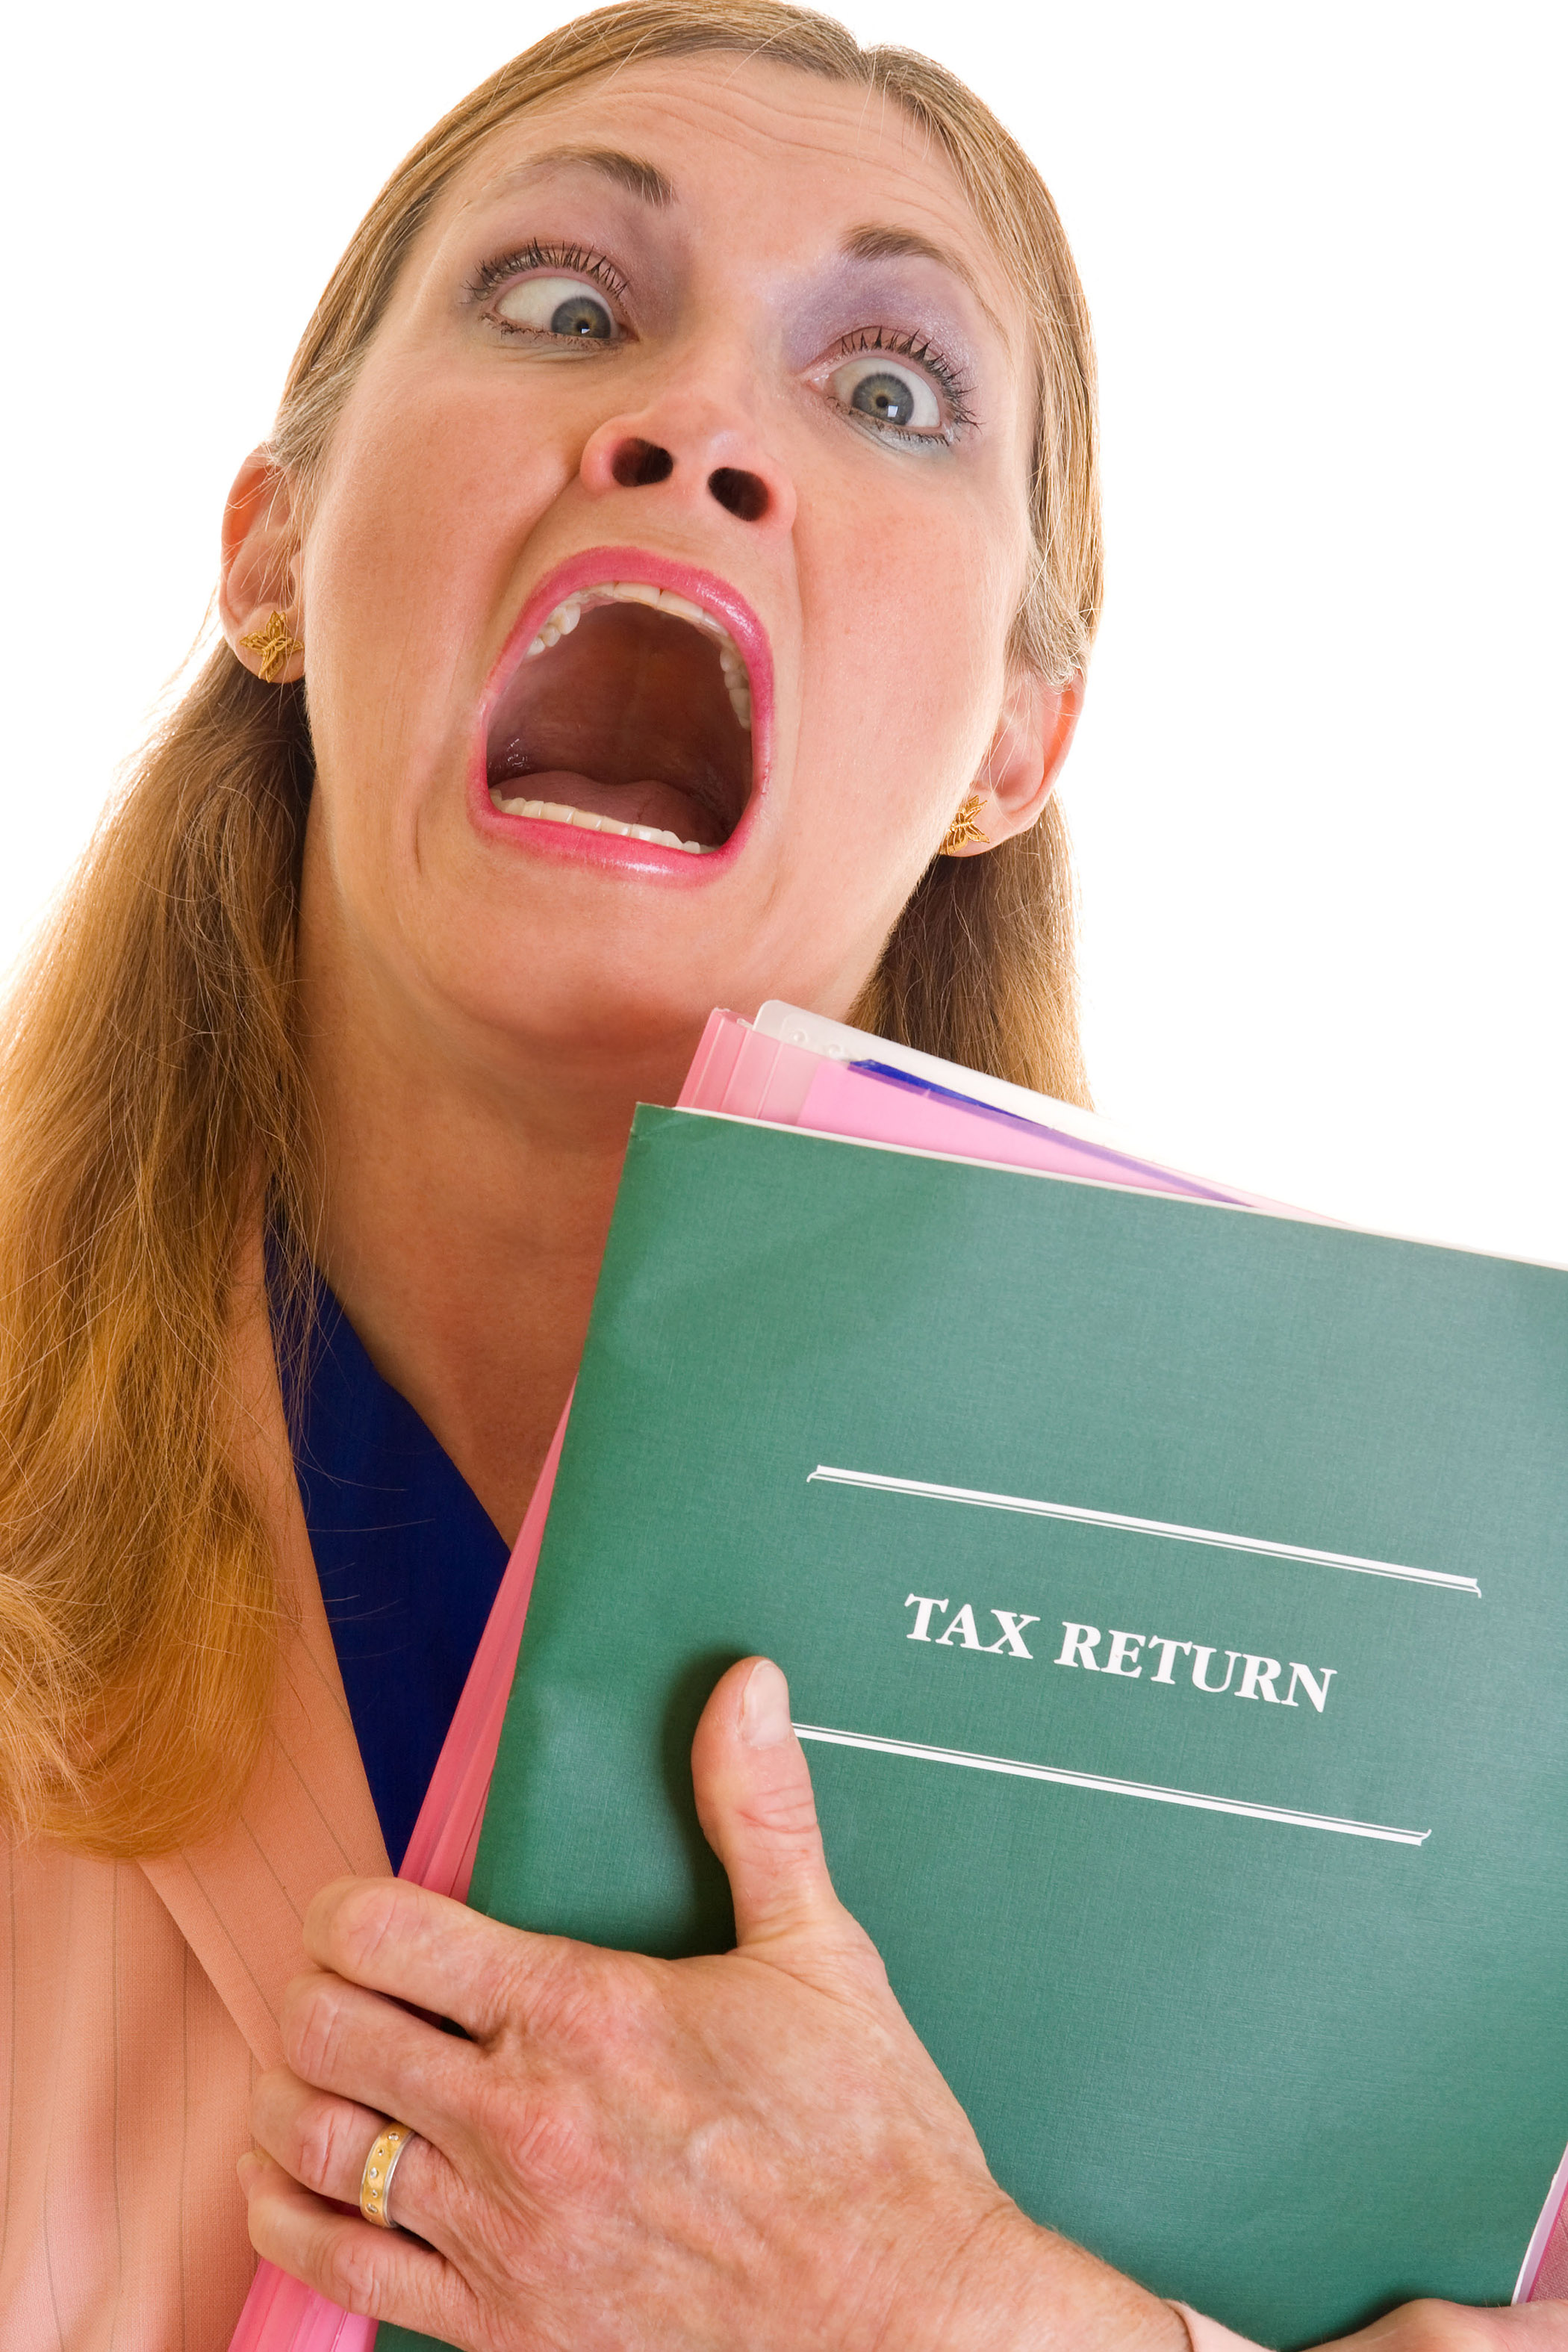 Frustrated, middle-aged executive business woman holding tax return which caused her eyes to cross.